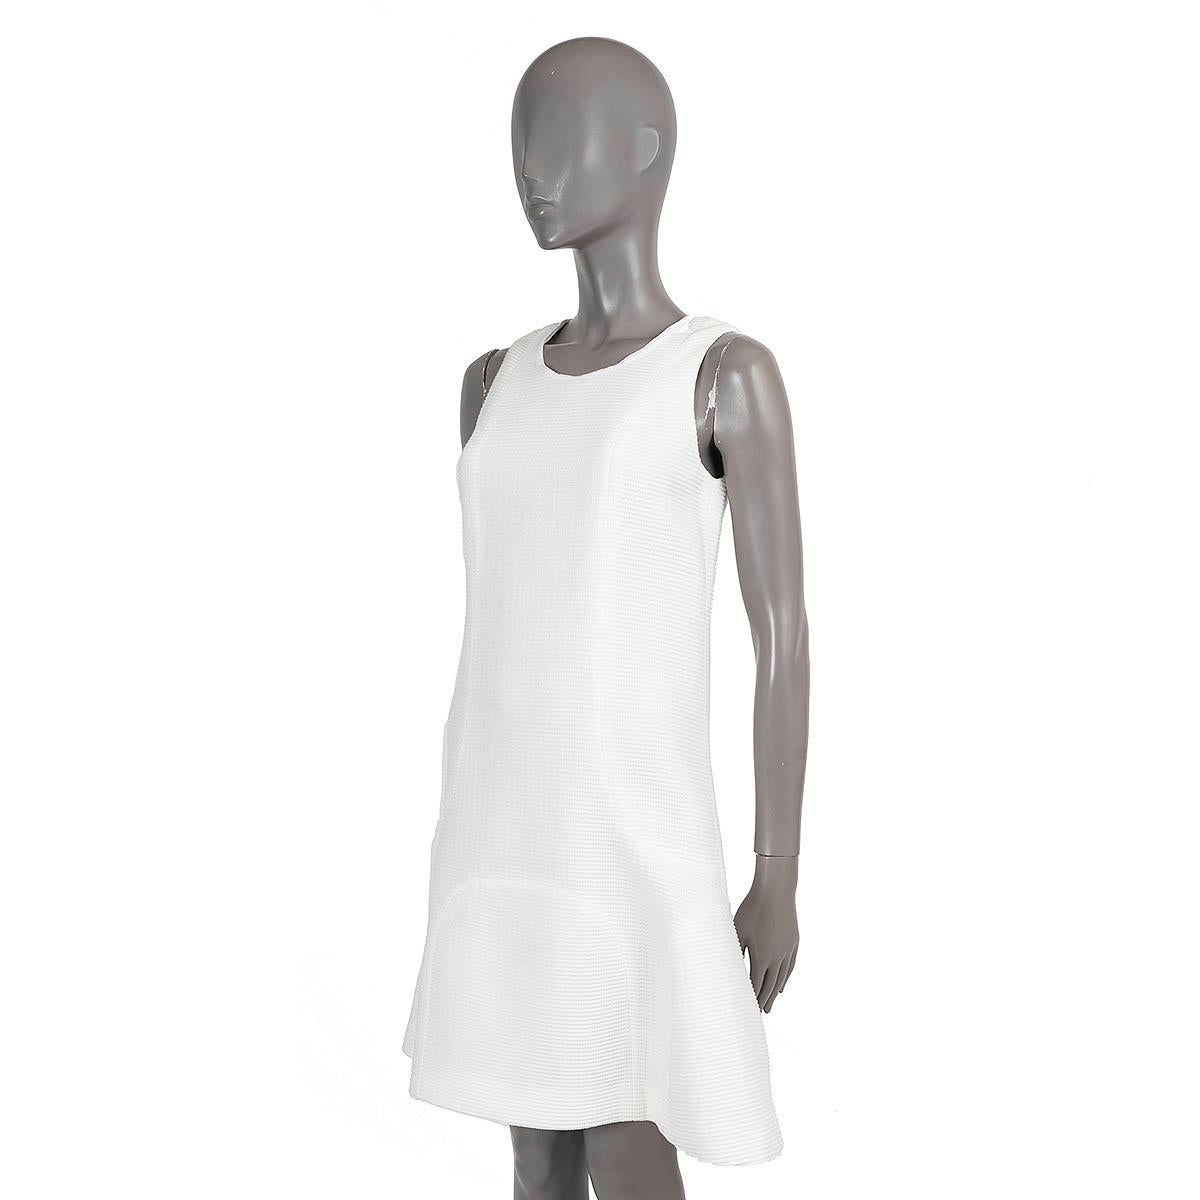 100% authentic Chanel ribbed short trumpet dress in off-white cotton (81%) and nylon (19%). Closes with hook and invisible zipper on the back. Lined in black silk (100%). Has been worn and is in excellent condition. 

2012